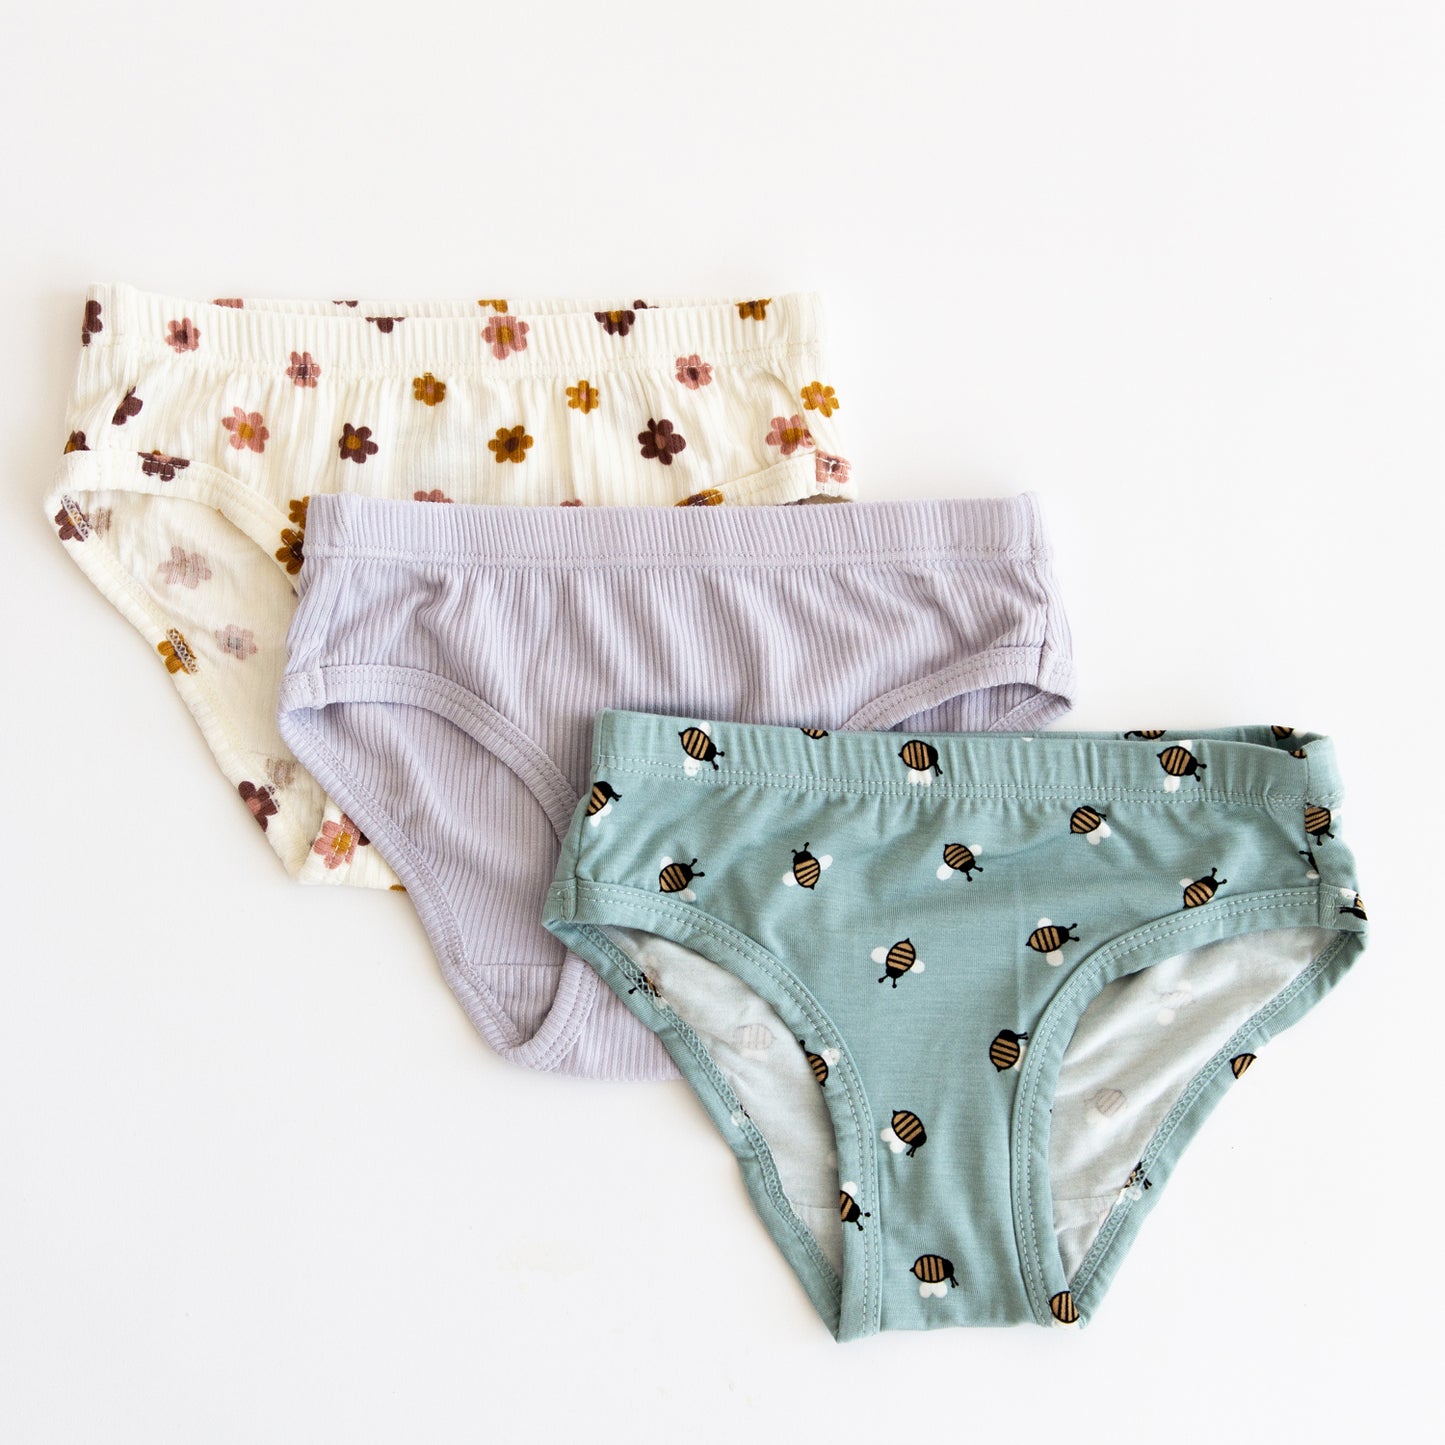 Blue Bees, Pink Daisies, Lilac Underwear 3 Pack